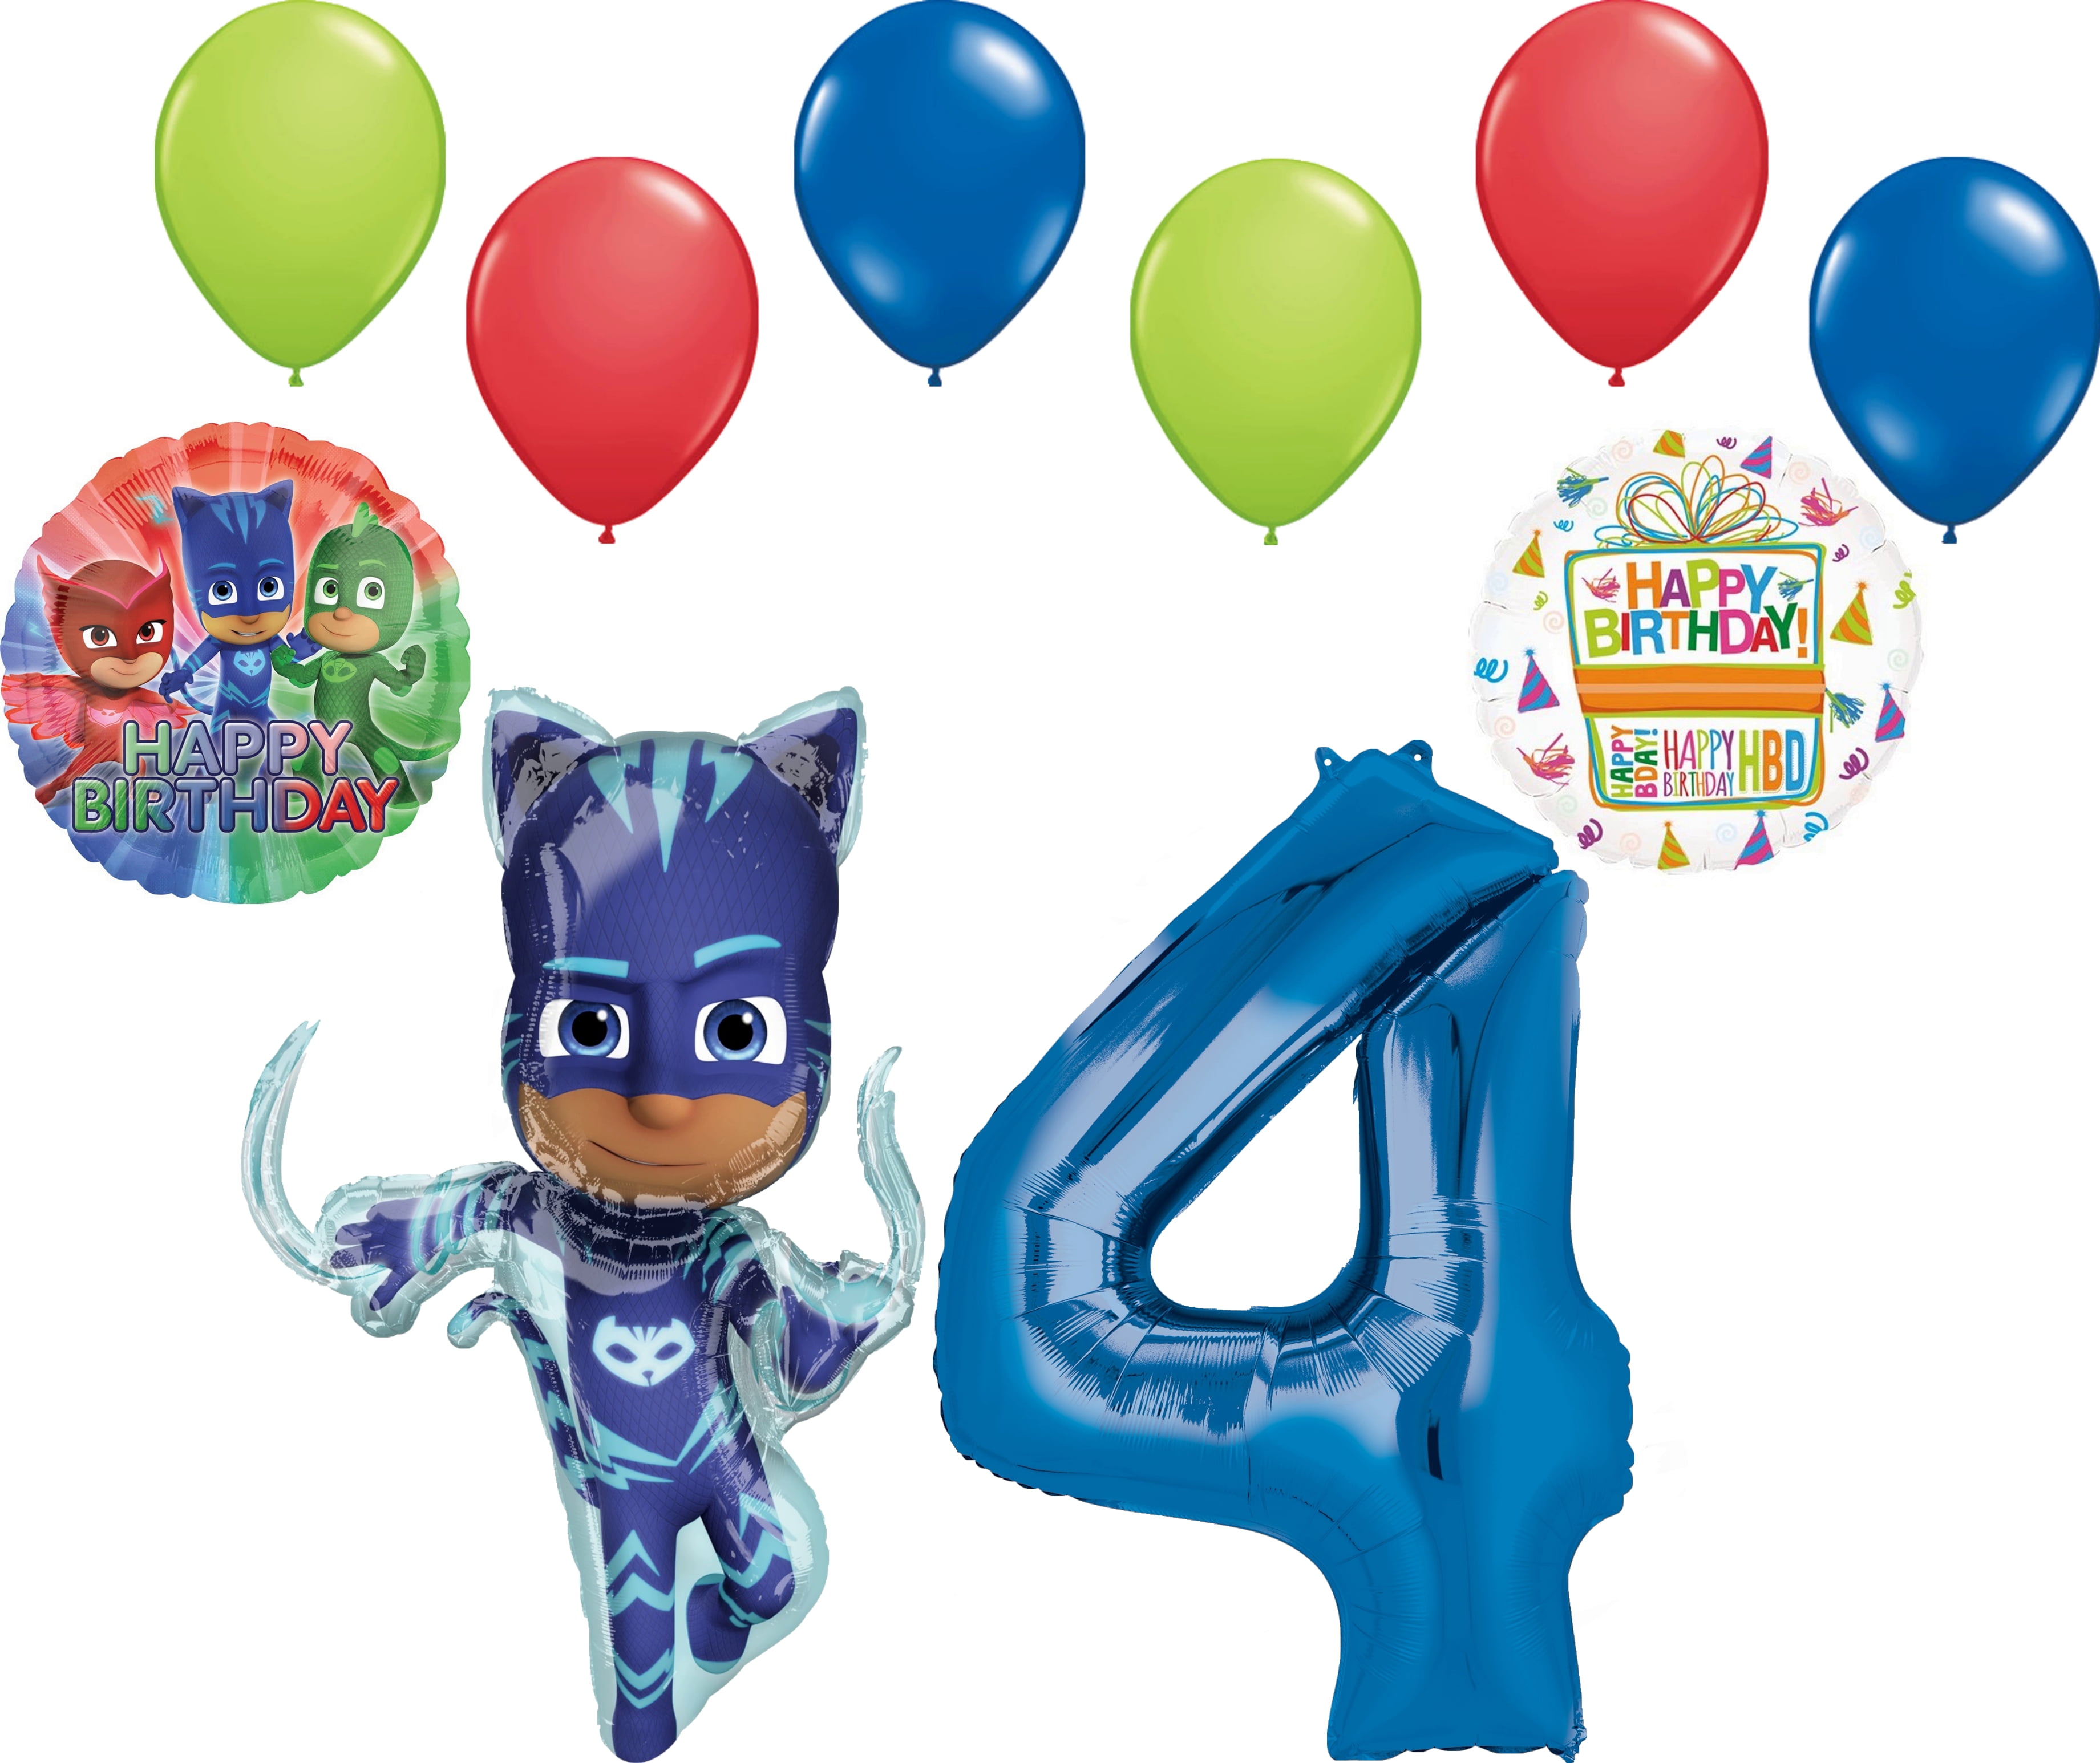 Mayflower Products PJ Masks Owlette Birthday Party Supplies Balloon Bouquet Decorations 